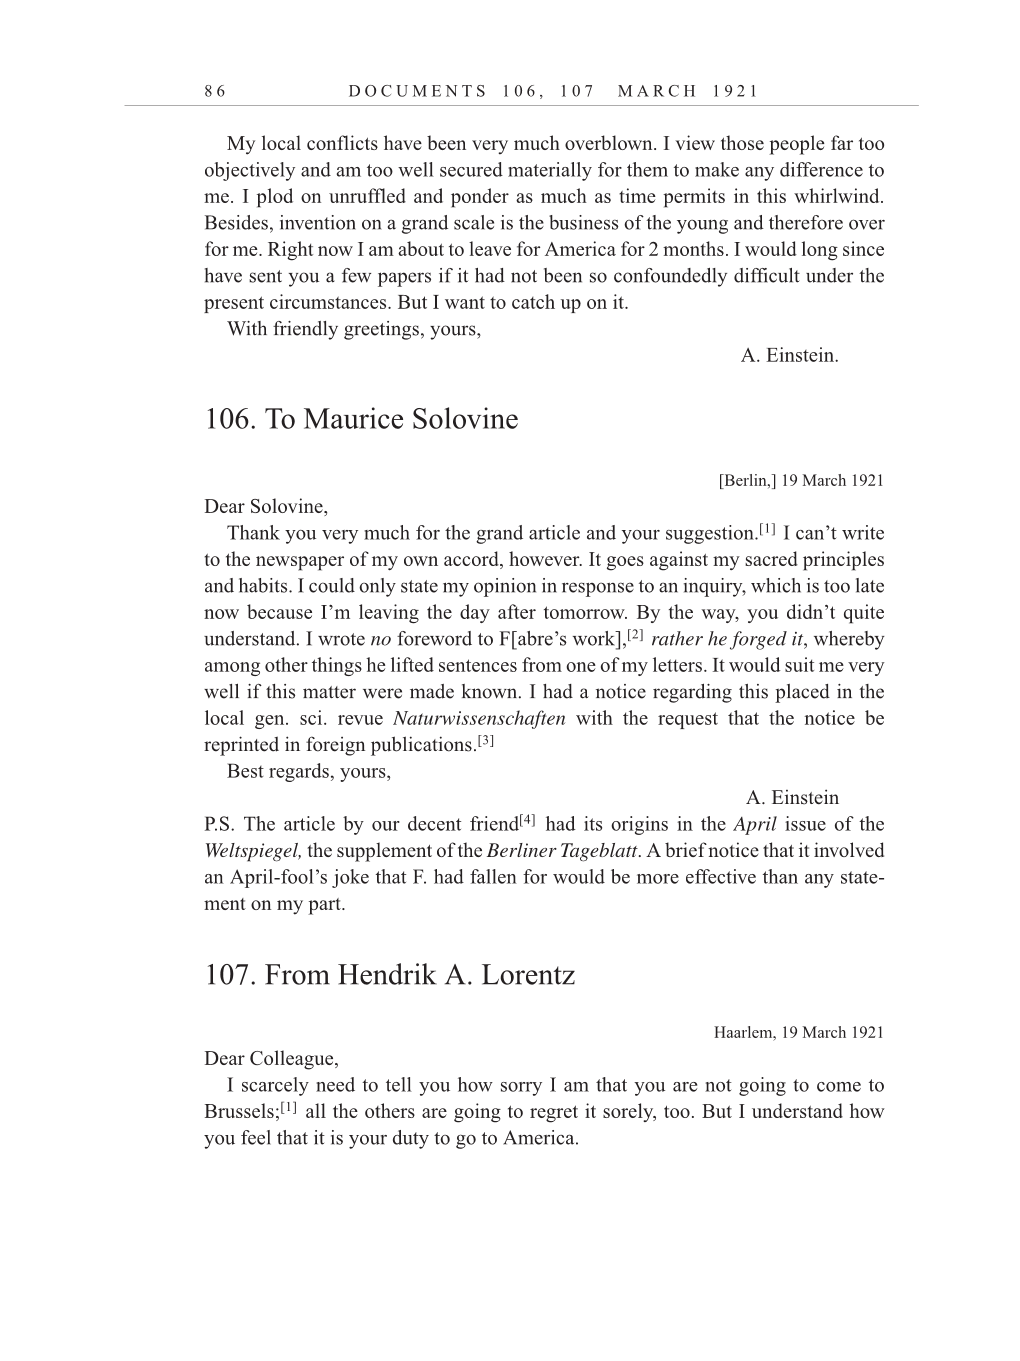 Volume 12: The Berlin Years: Correspondence, January-December 1921 (English translation supplement) page 86